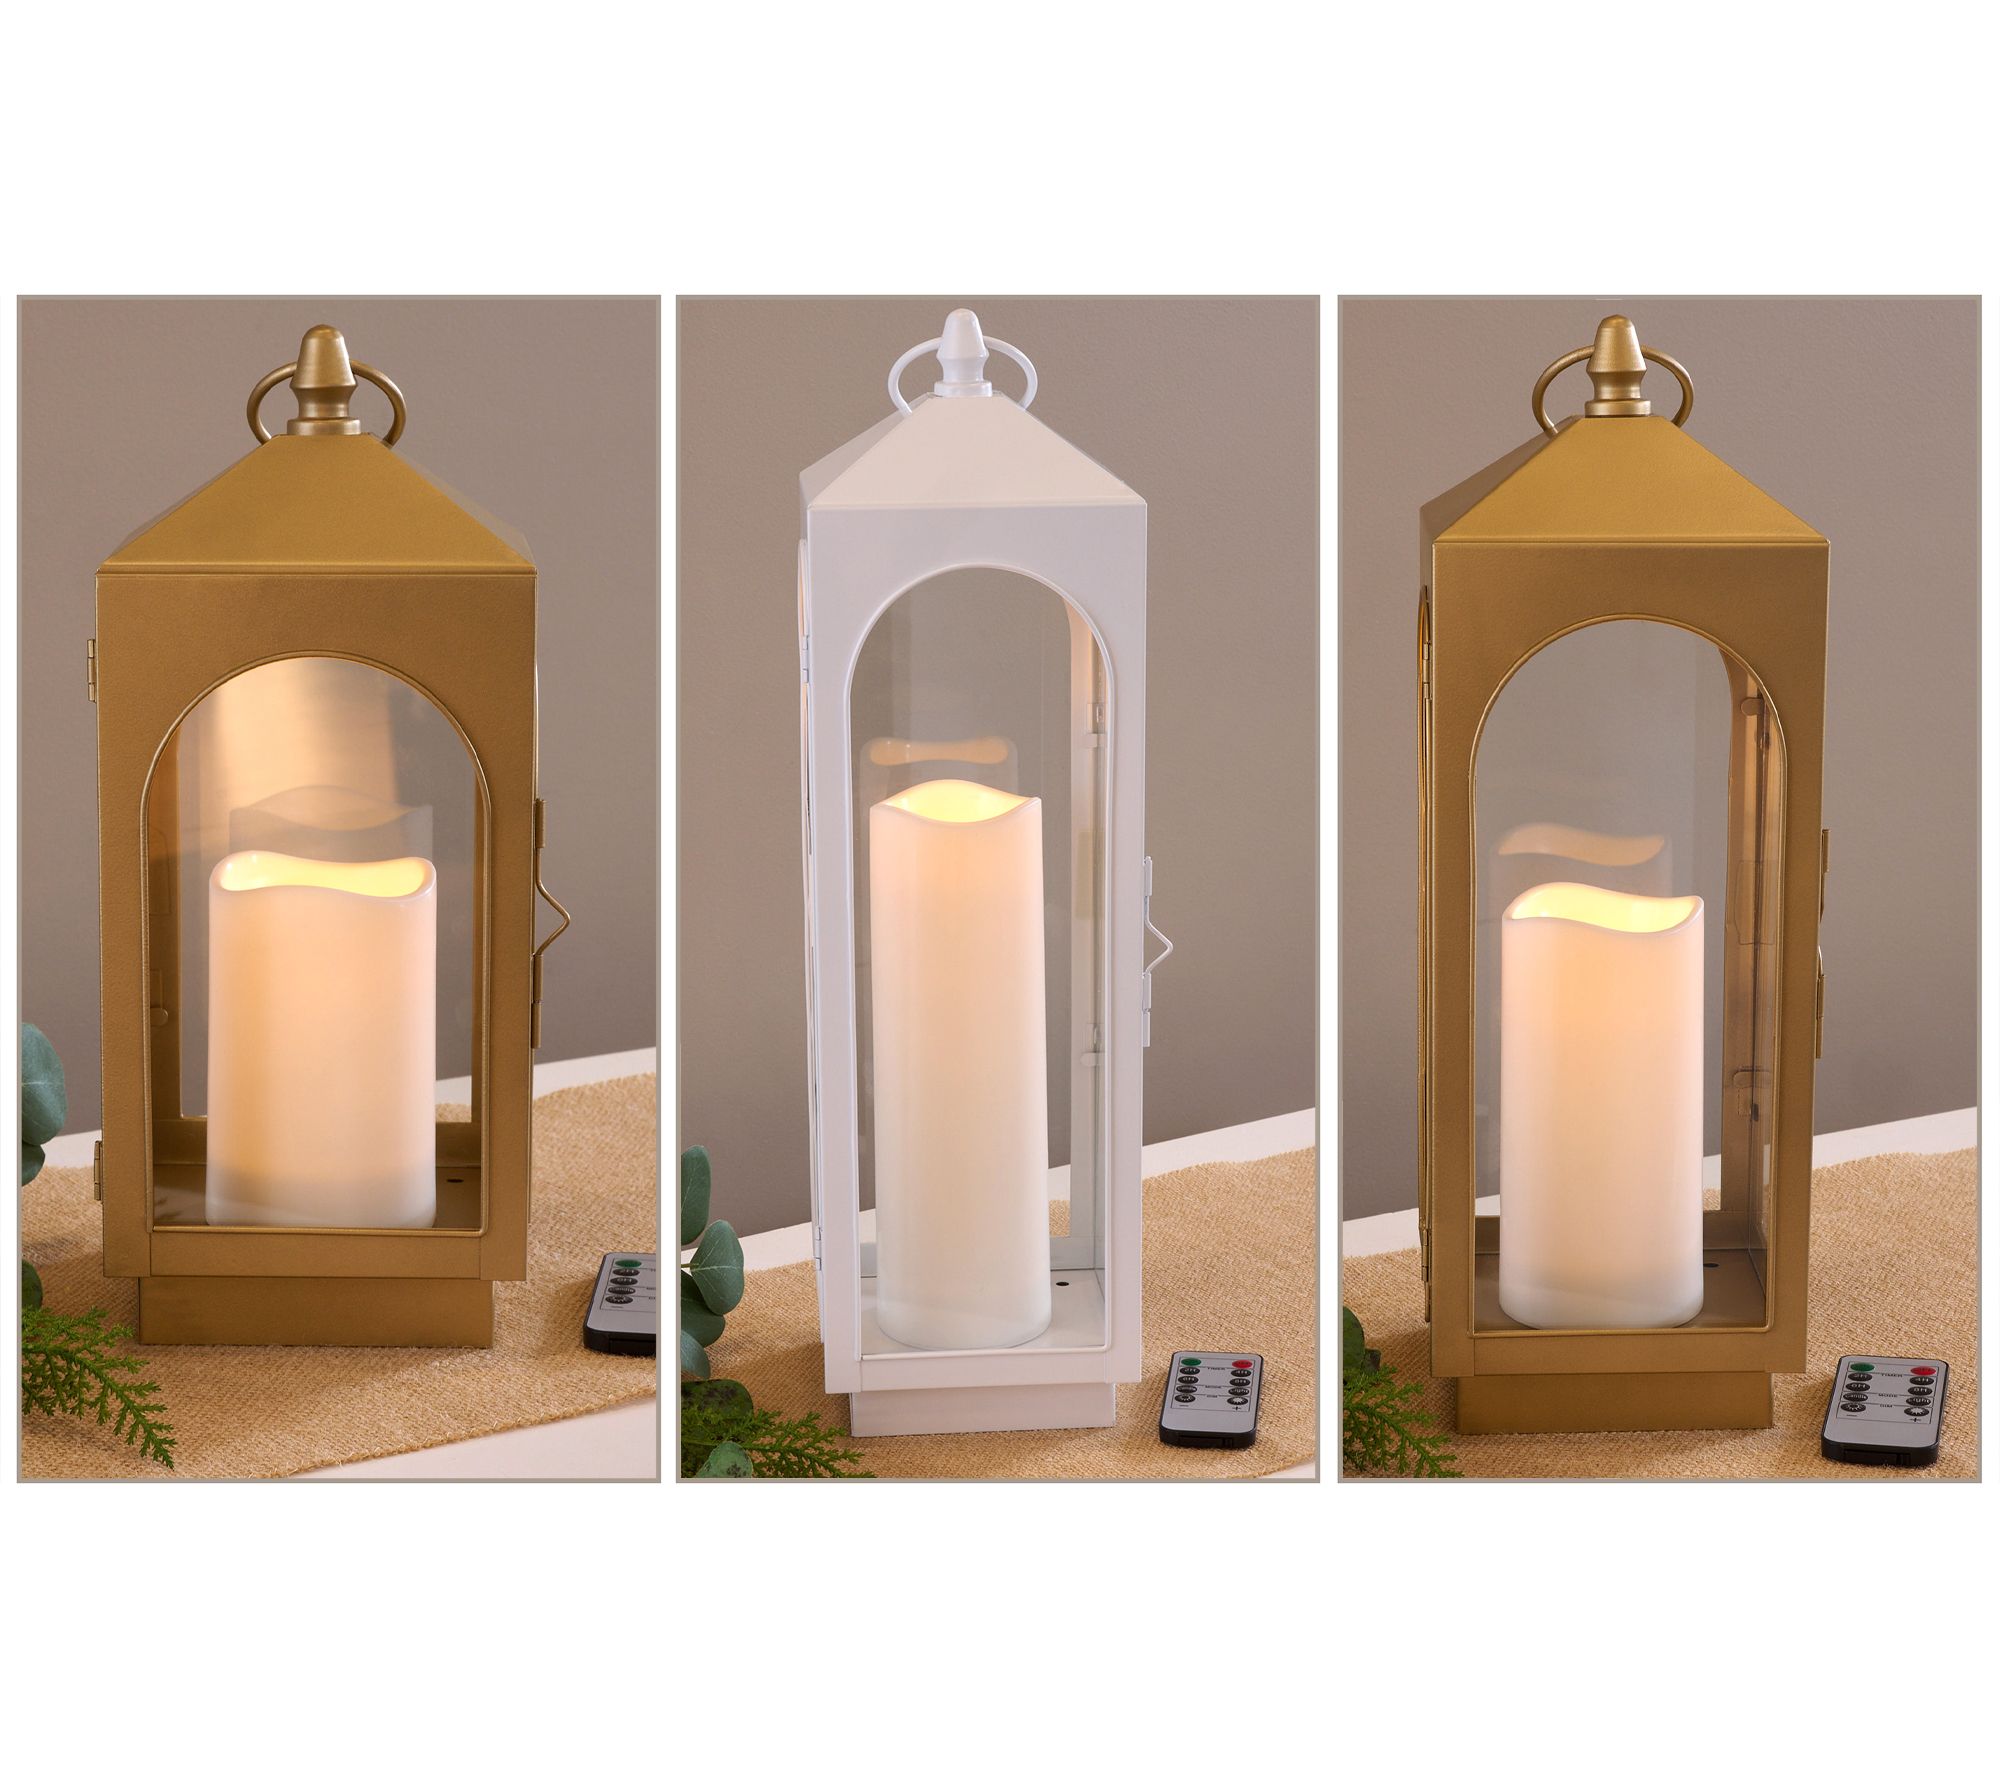 As Is Home Reflections 4Pc Indoor/Outdoor Metal Lanterns with Lit Pillar 